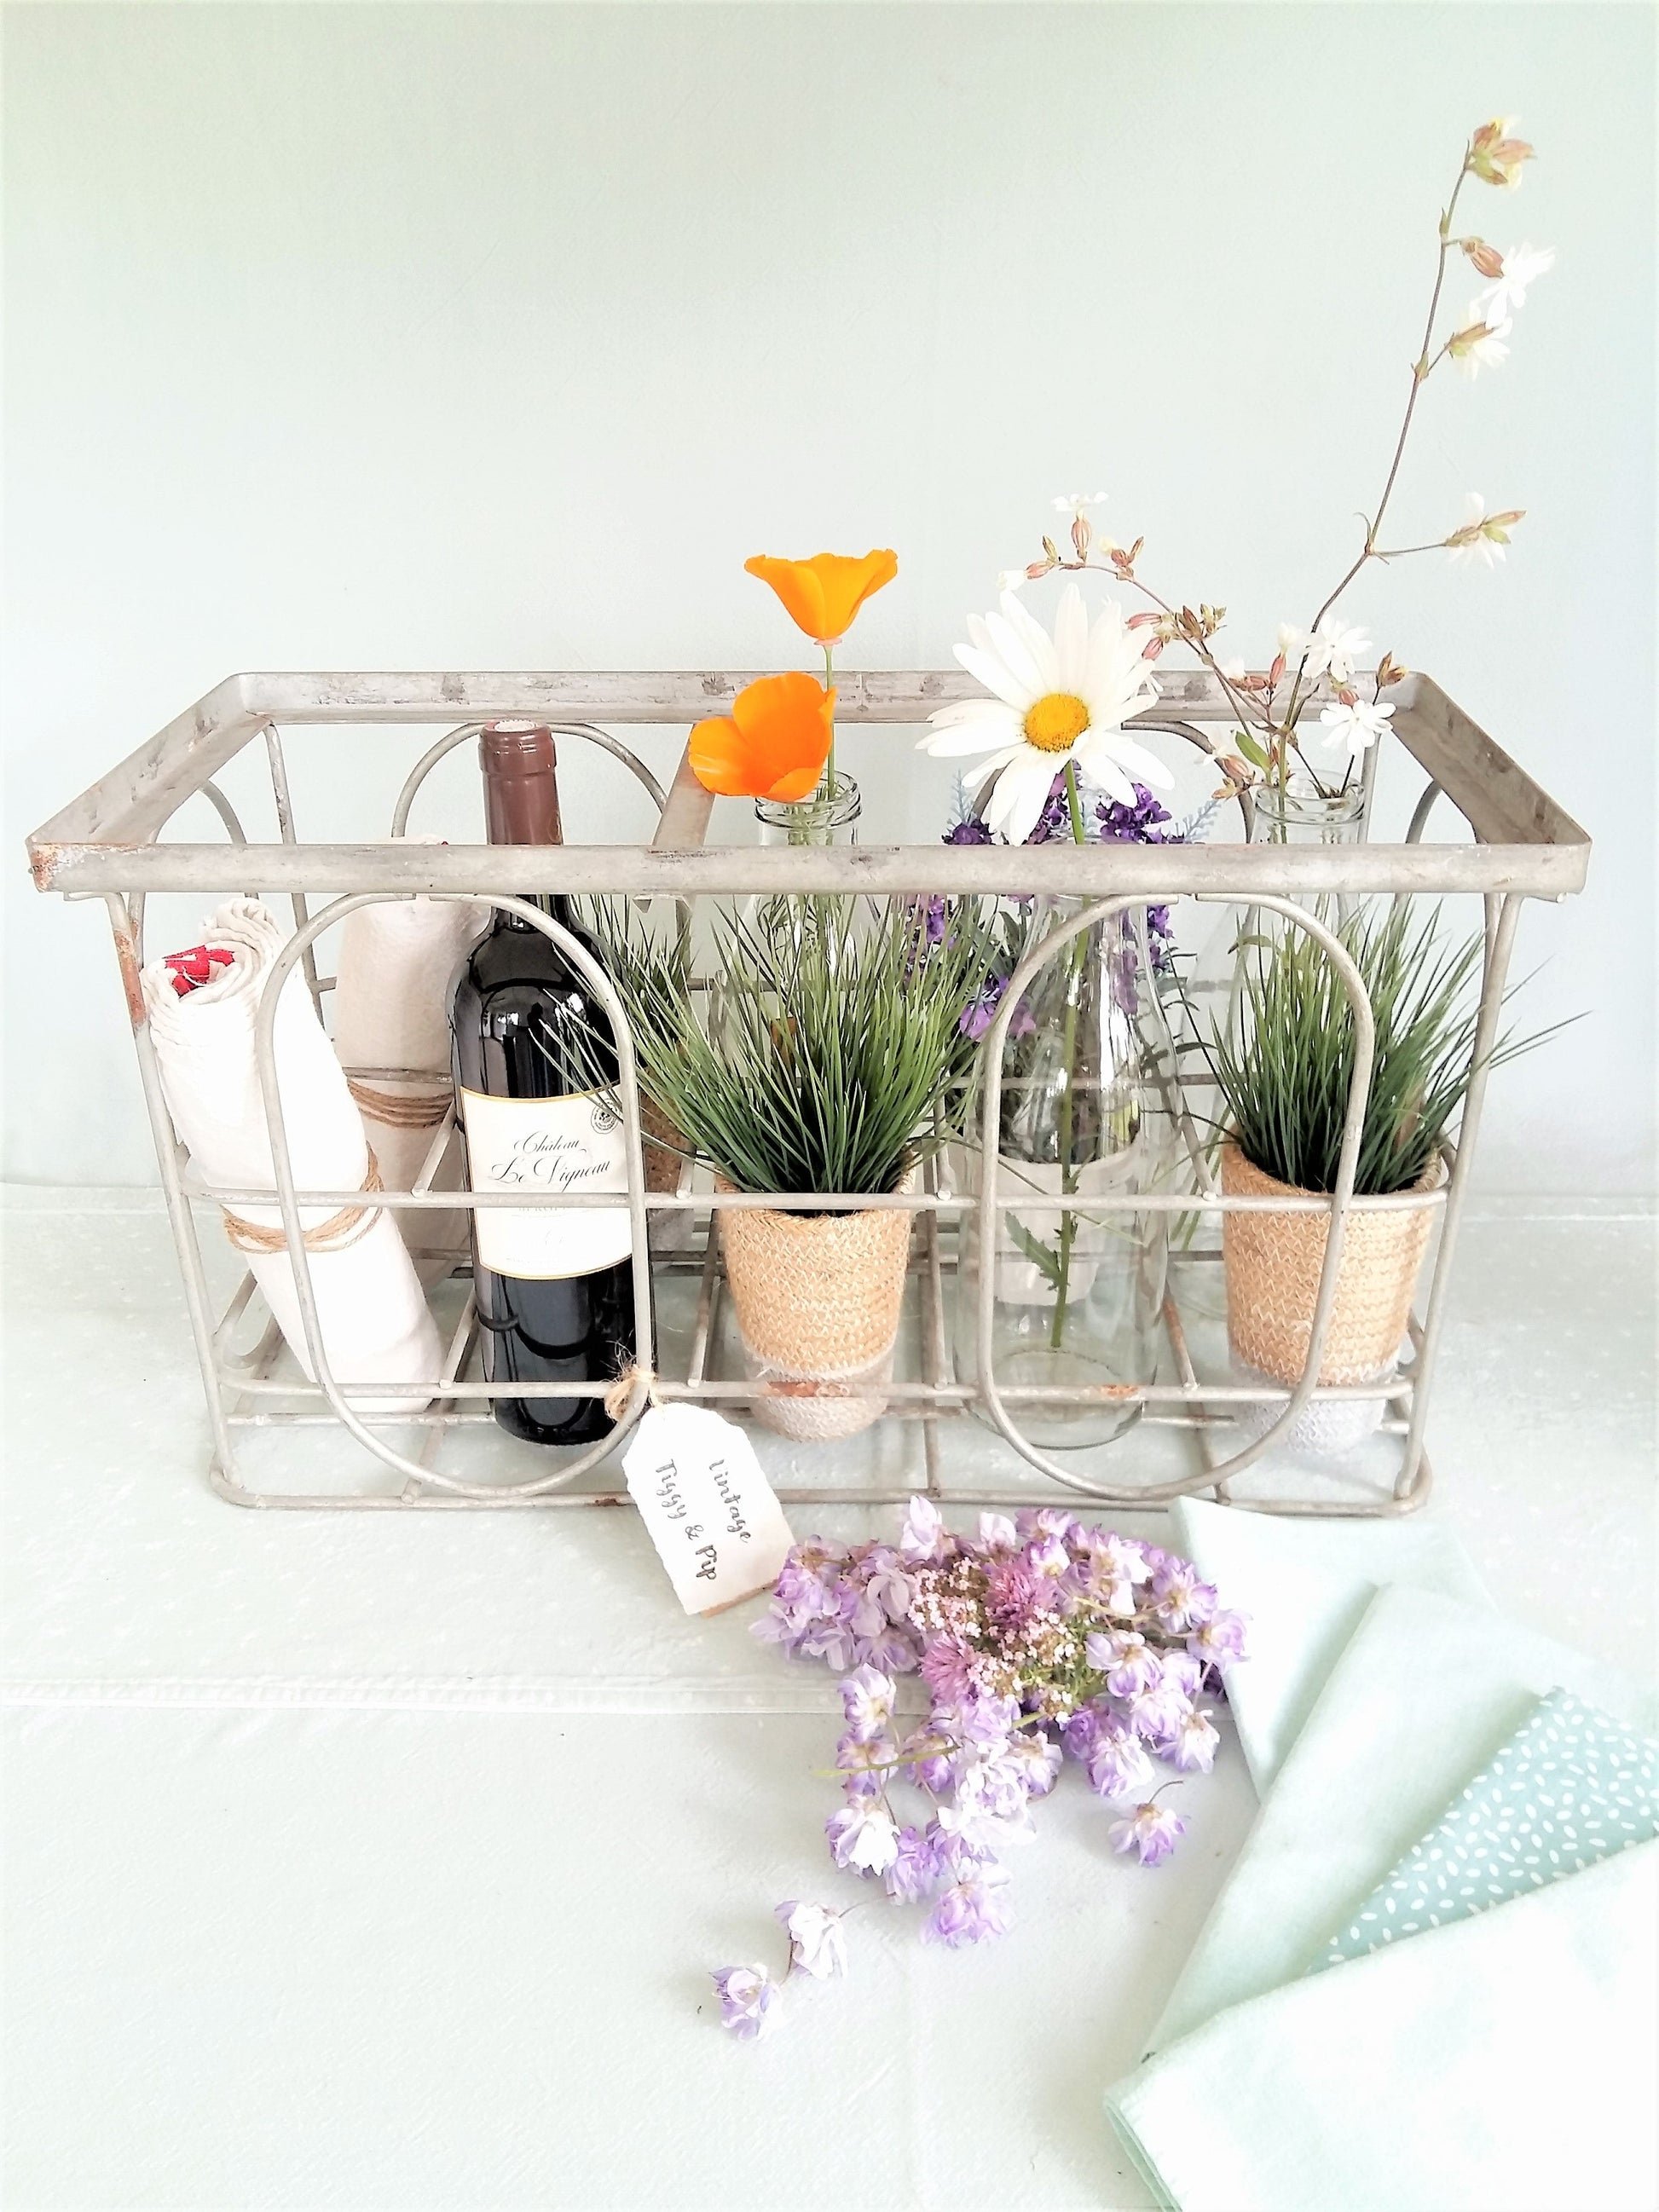 Vintage 1950s Metal Milk Bottle Crate from Tiggy and Pip - €220.00! Shop now at Tiggy and Pip